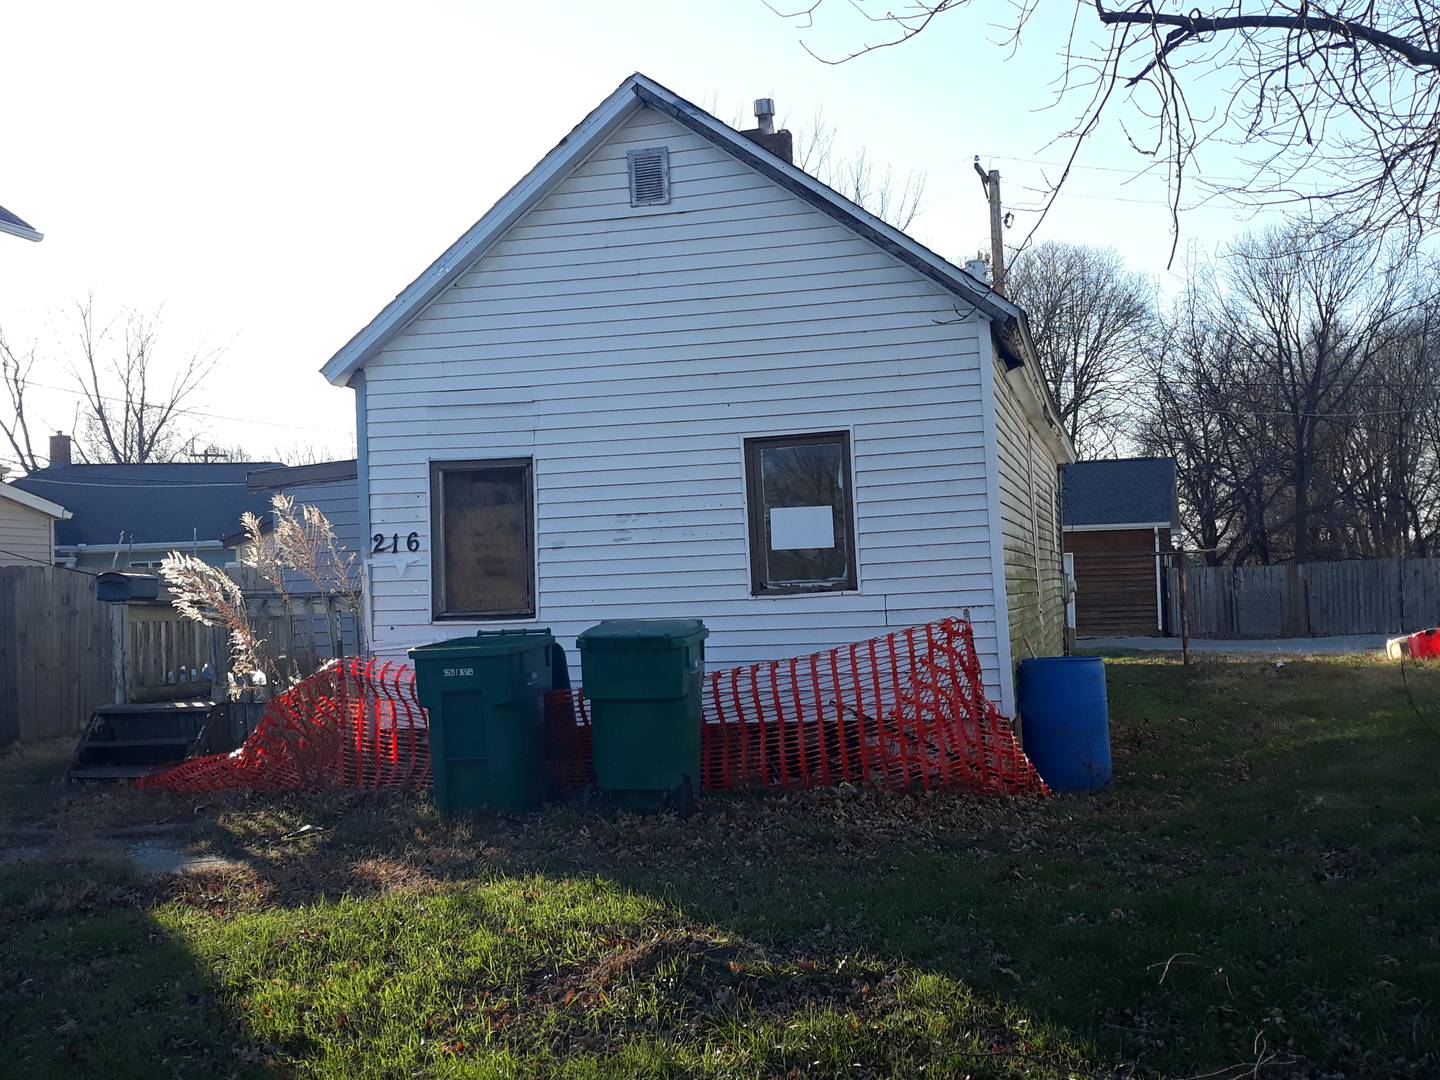 The abandoned house at 216 Sherman St. in Streator is slated for demolition.